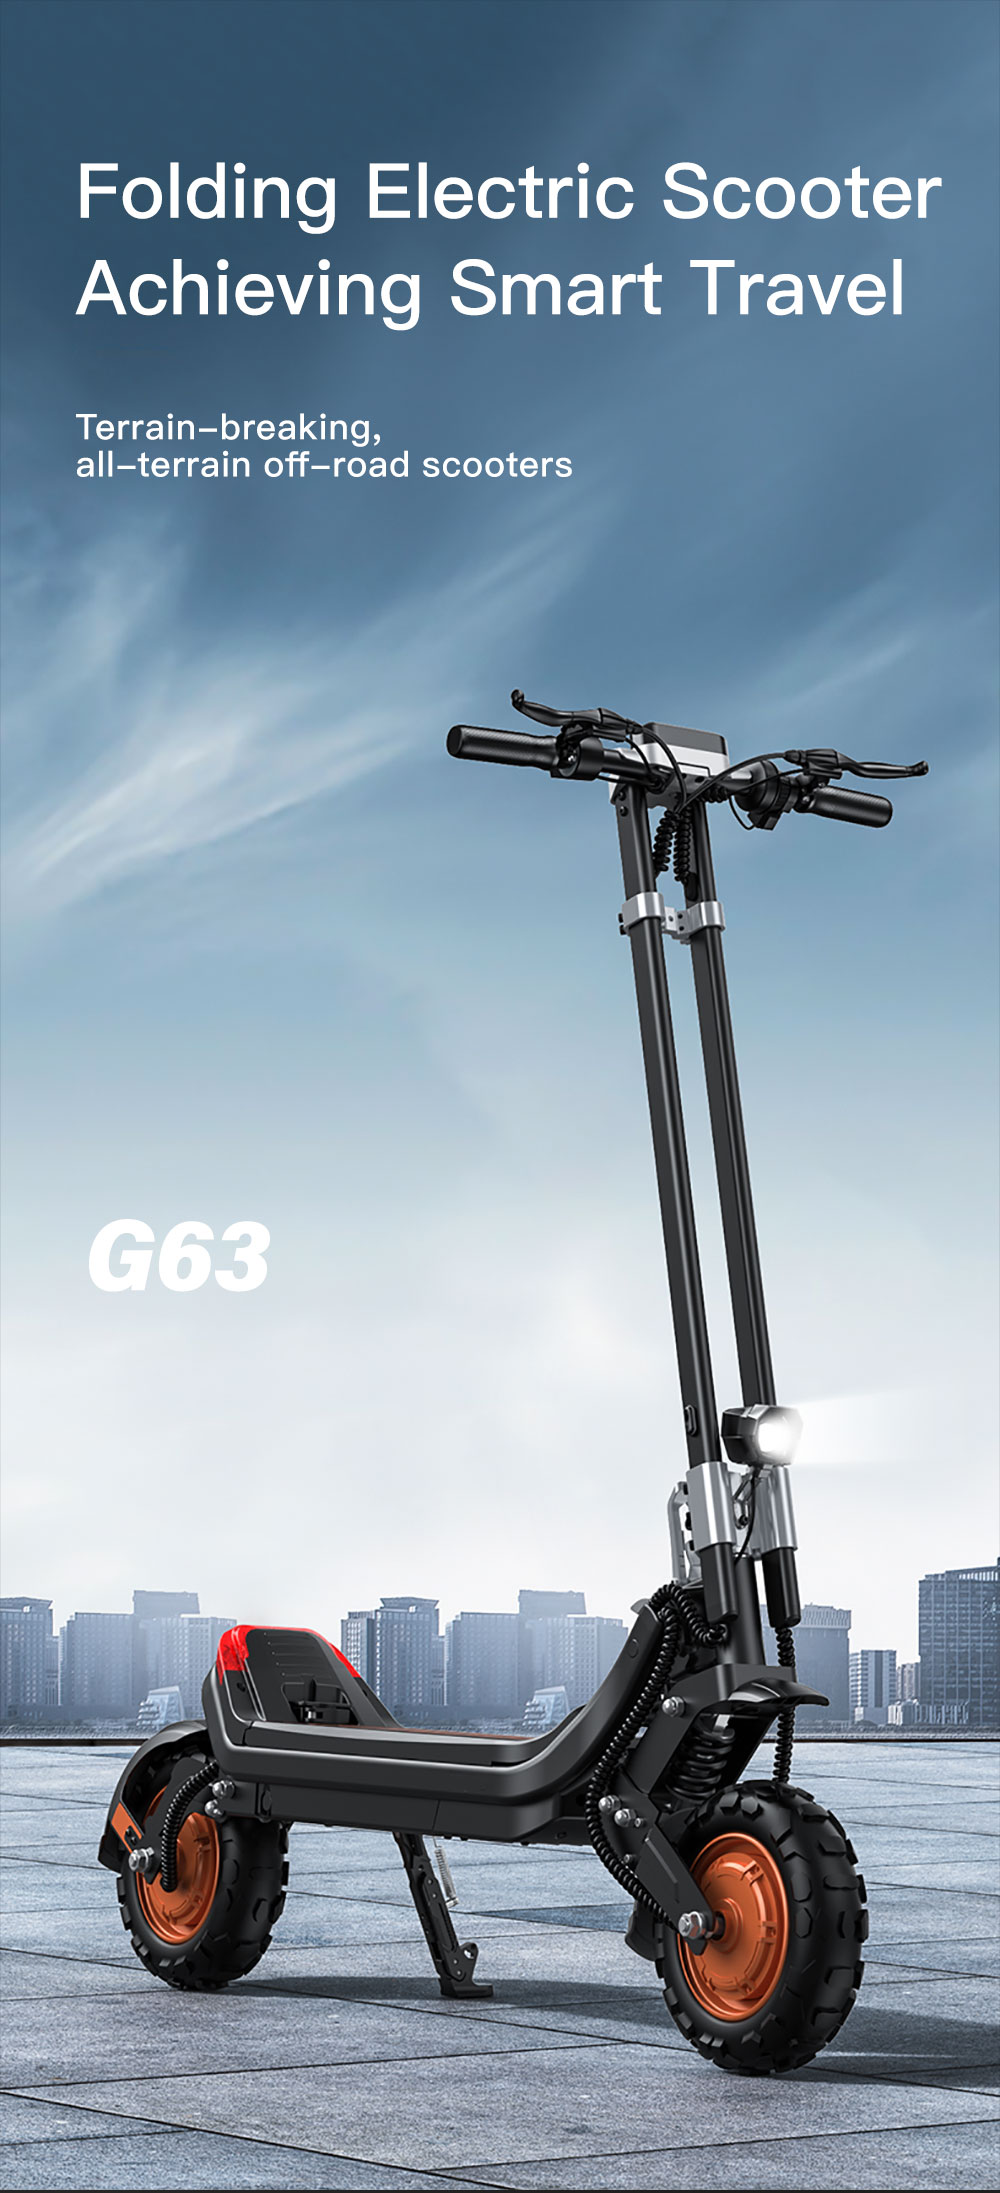 G63 Electric Scooter 1200W*2 Dual Motors 48V 20Ah Battery 55km/h Max Speed 50km Range 11' Pneumatic Off-road Tire Black